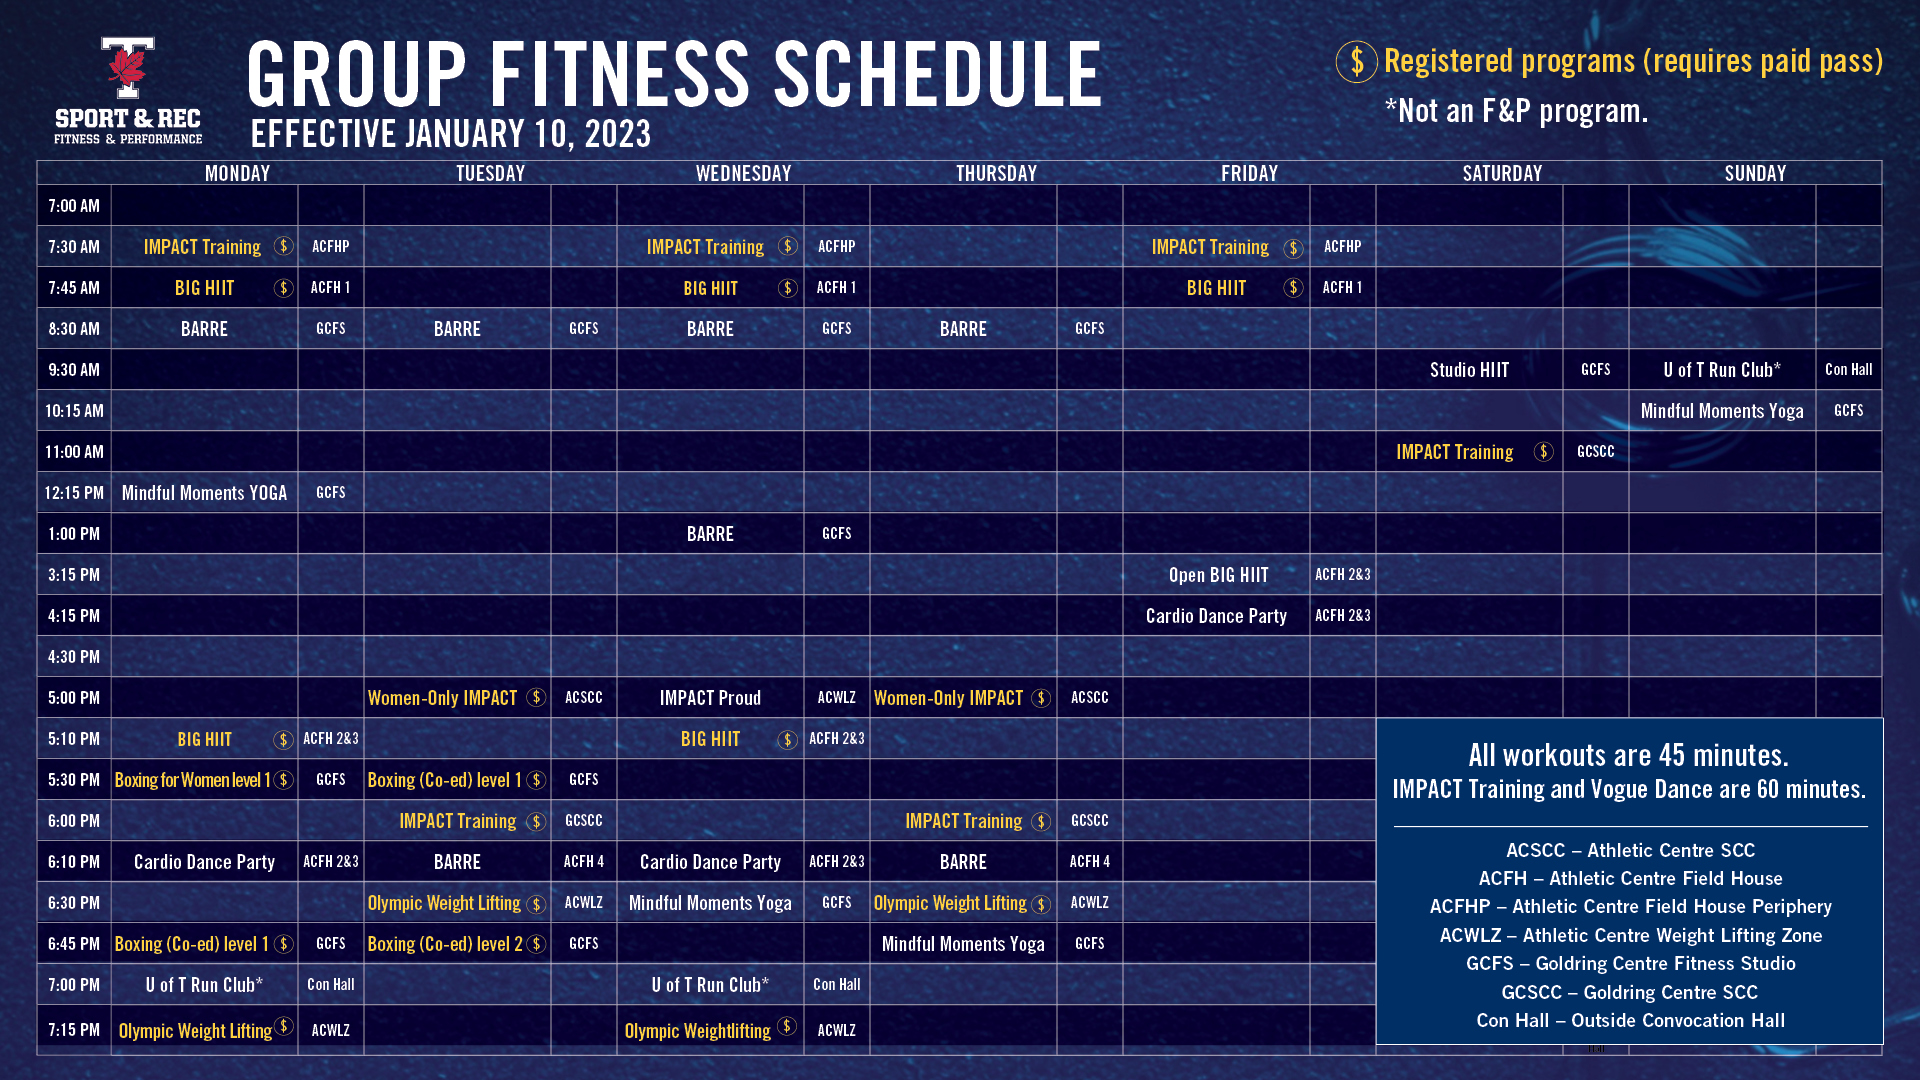 Group fitness schedule in a table listing